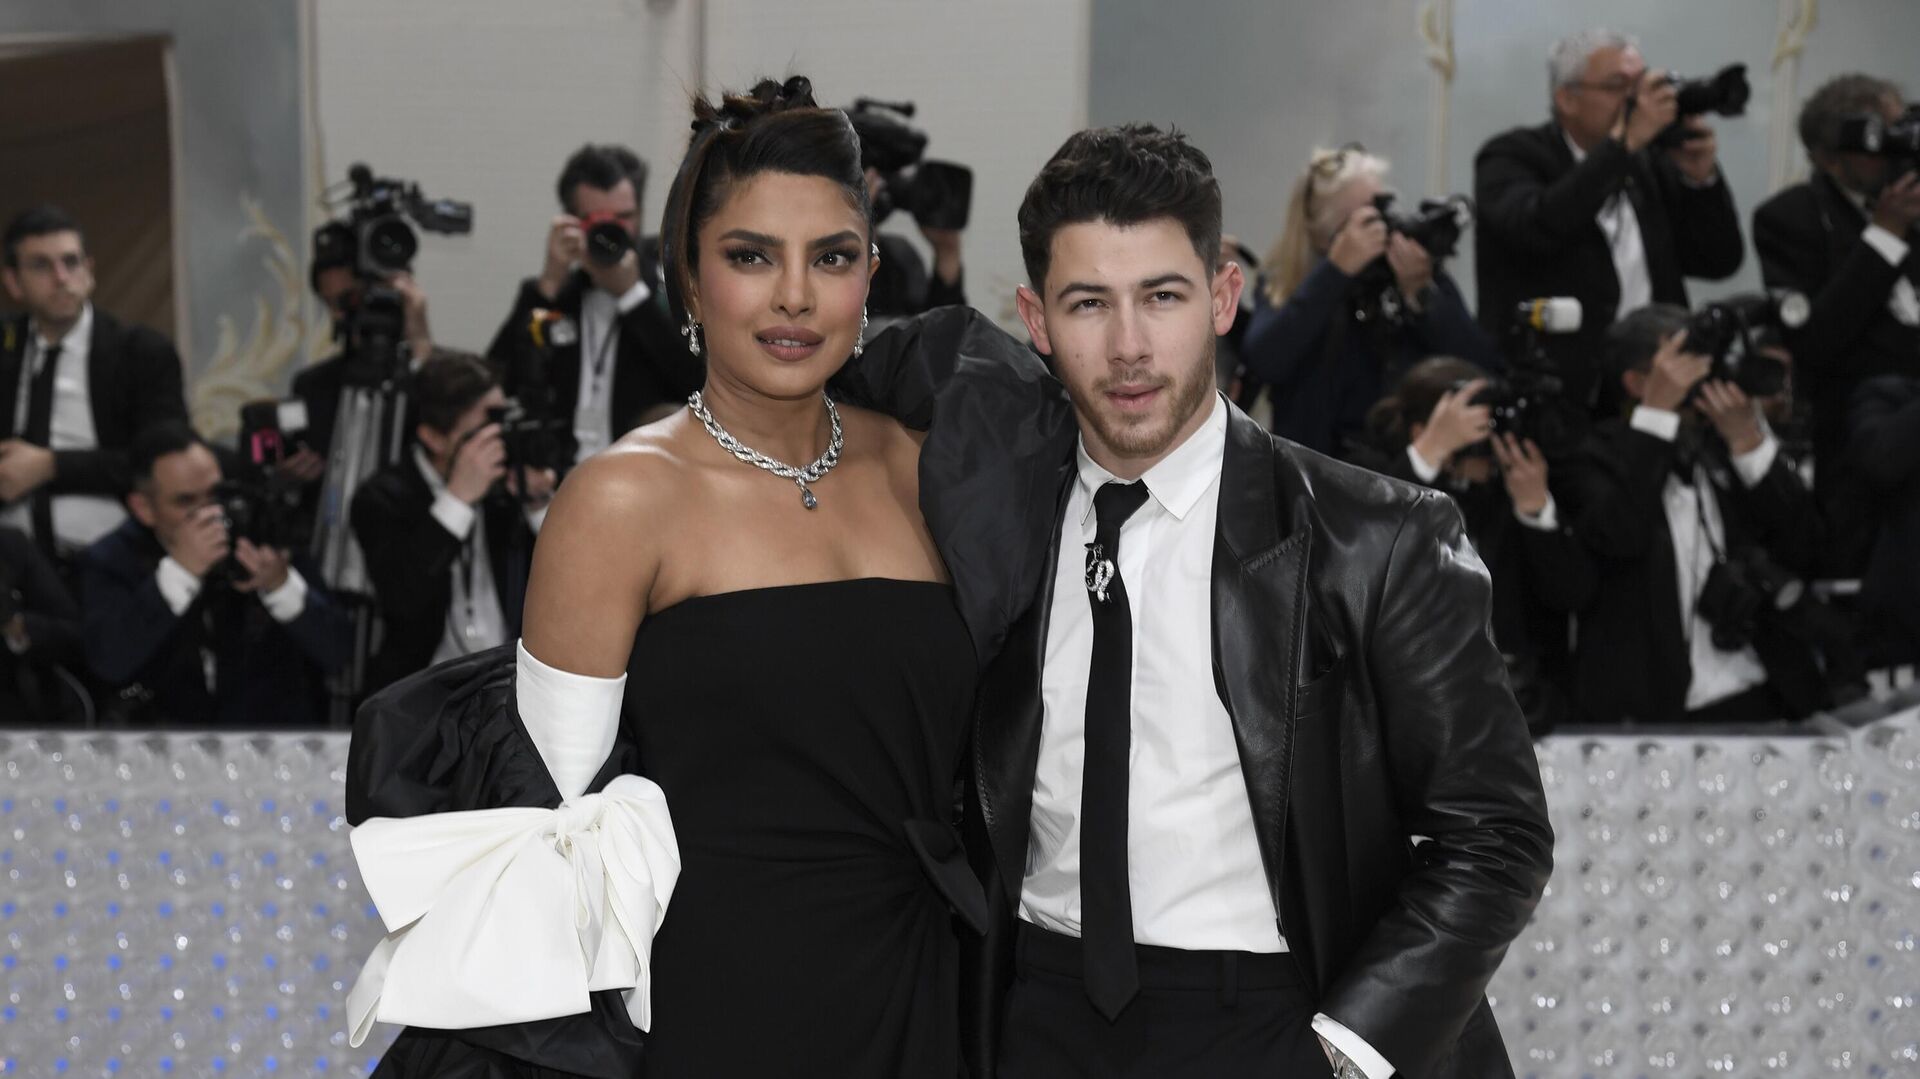 Priyanka Chopra, left, and Nick Jonas attend The Metropolitan Museum of Art's Costume Institute benefit gala celebrating the opening of the Karl Lagerfeld: A Line of Beauty exhibition on Monday, May 1, 2023, in New York. - Sputnik India, 1920, 02.05.2023